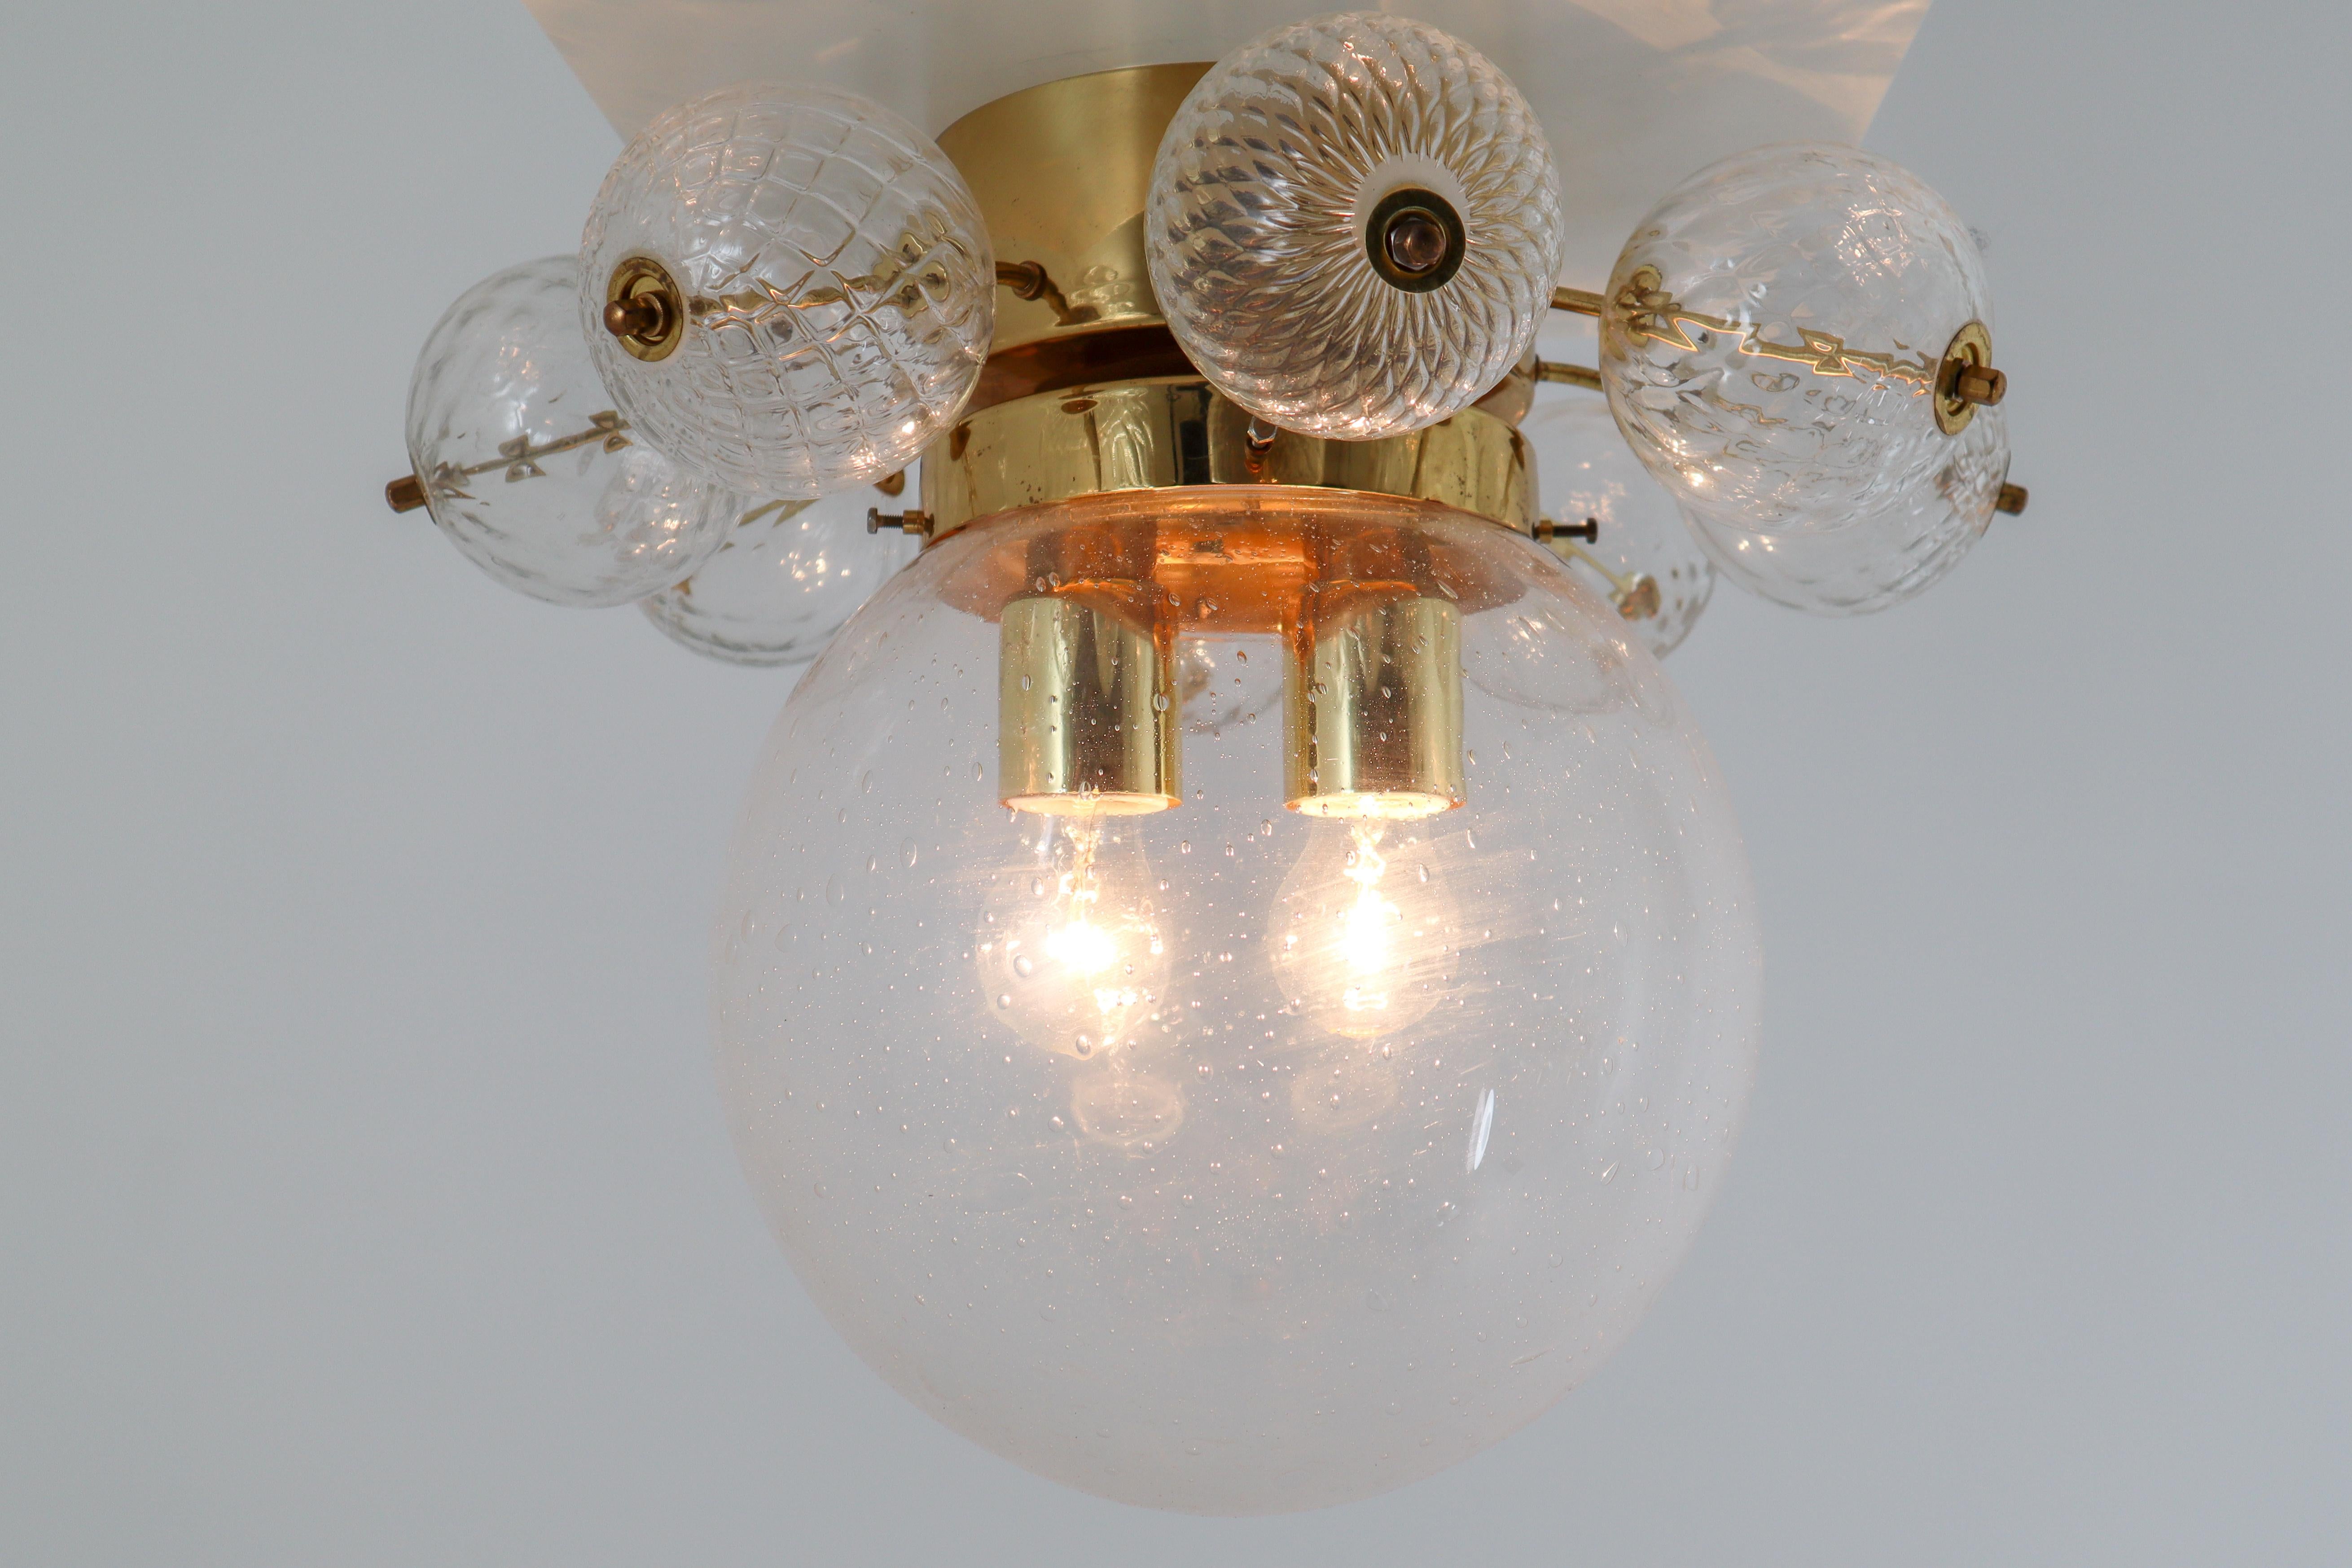 Set of two large ceiling lamp chandeliers with brass base and large handblown glass globe. The lights are beautifully decorated thanks to the structured glass. The pleasant light it spreads is very atmospheric, these large ceiling lamp-chandeliers